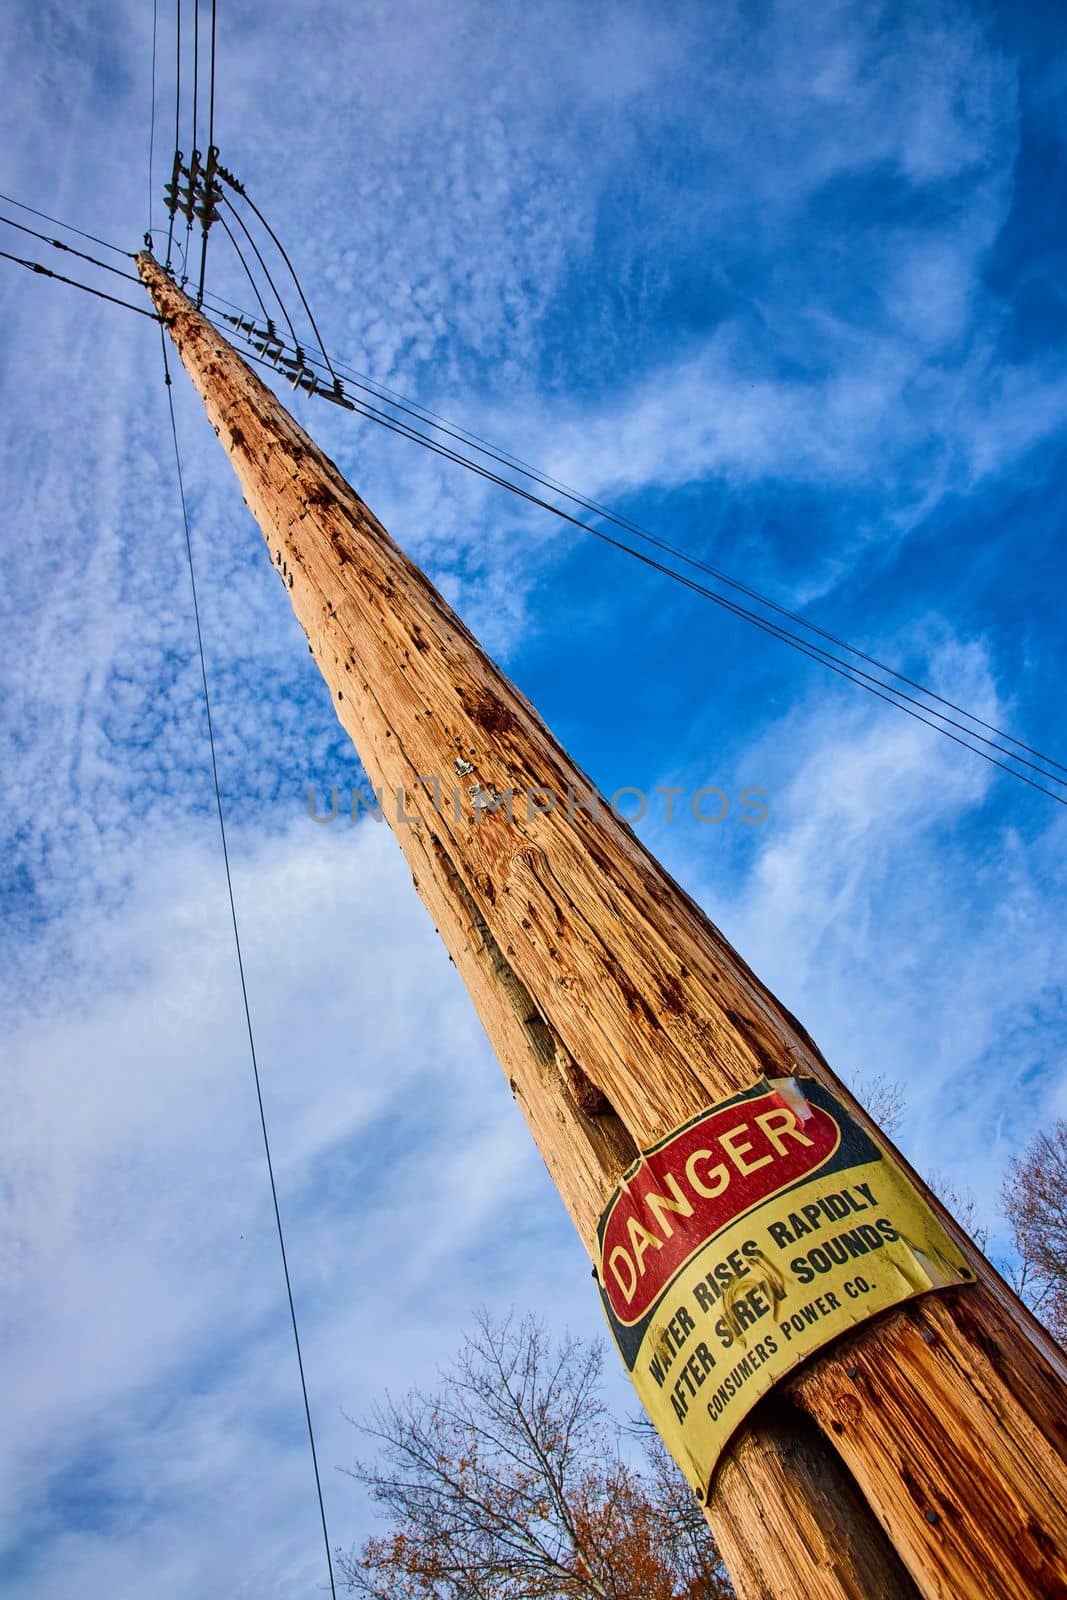 Looking up at telephone pole with large DANGER sign posted about flooding area by njproductions